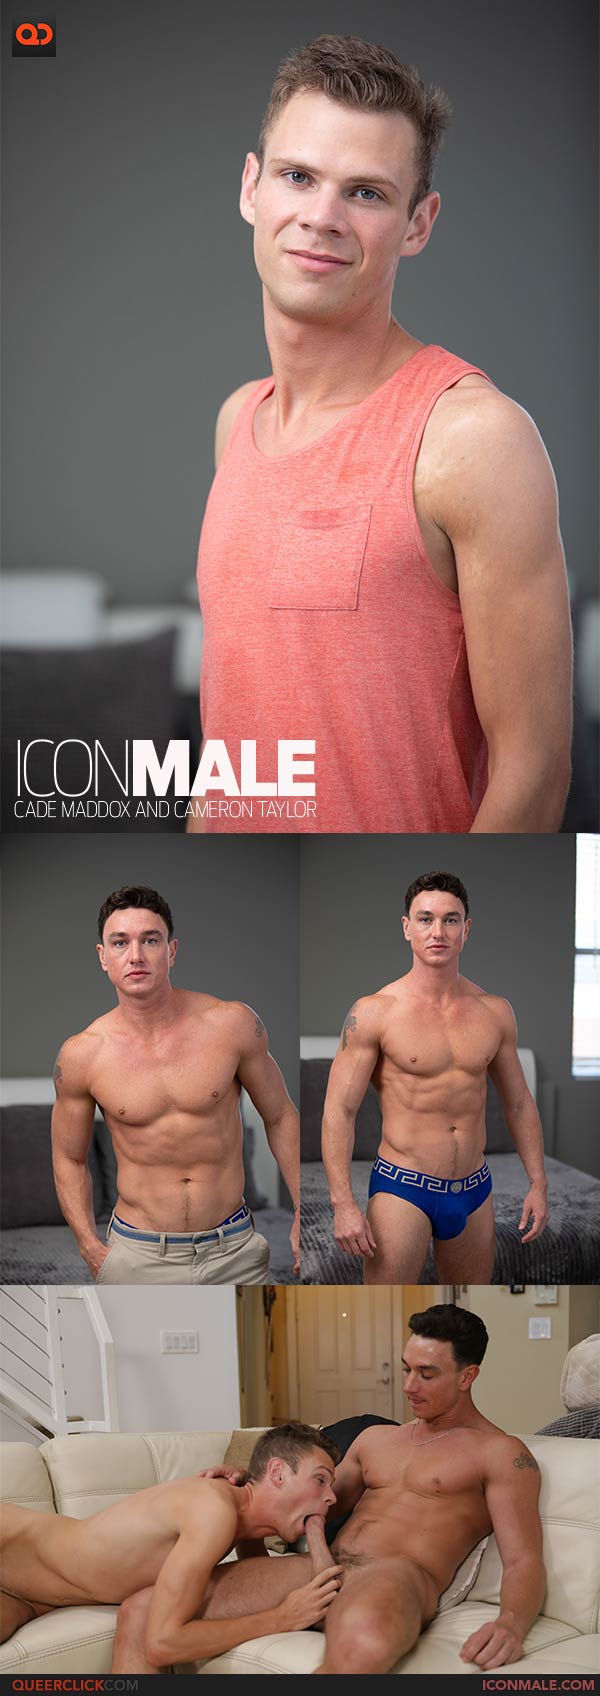 IconMale: Cade Maddox and Cameron Taylor